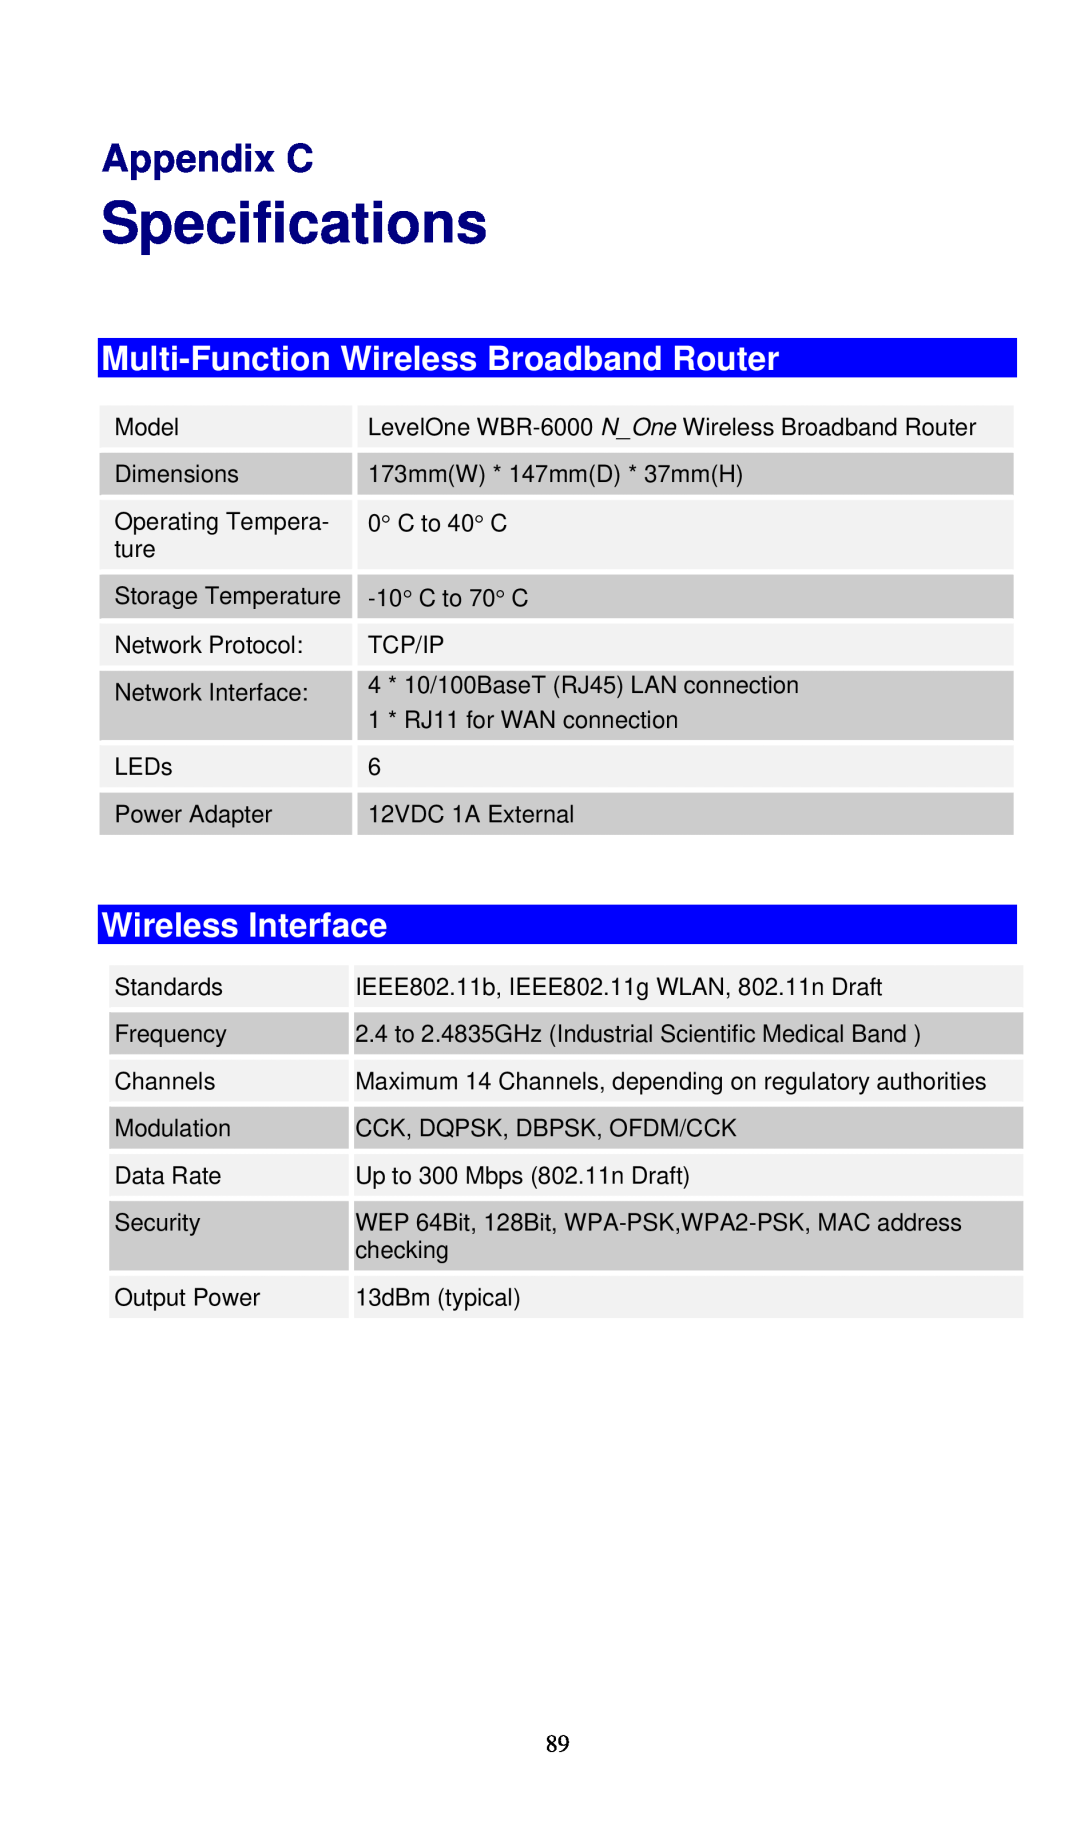 LevelOne WBR-6000 user manual Specifications, Appendix C, Multi-Function Wireless Broadband Router, Wireless Interface 